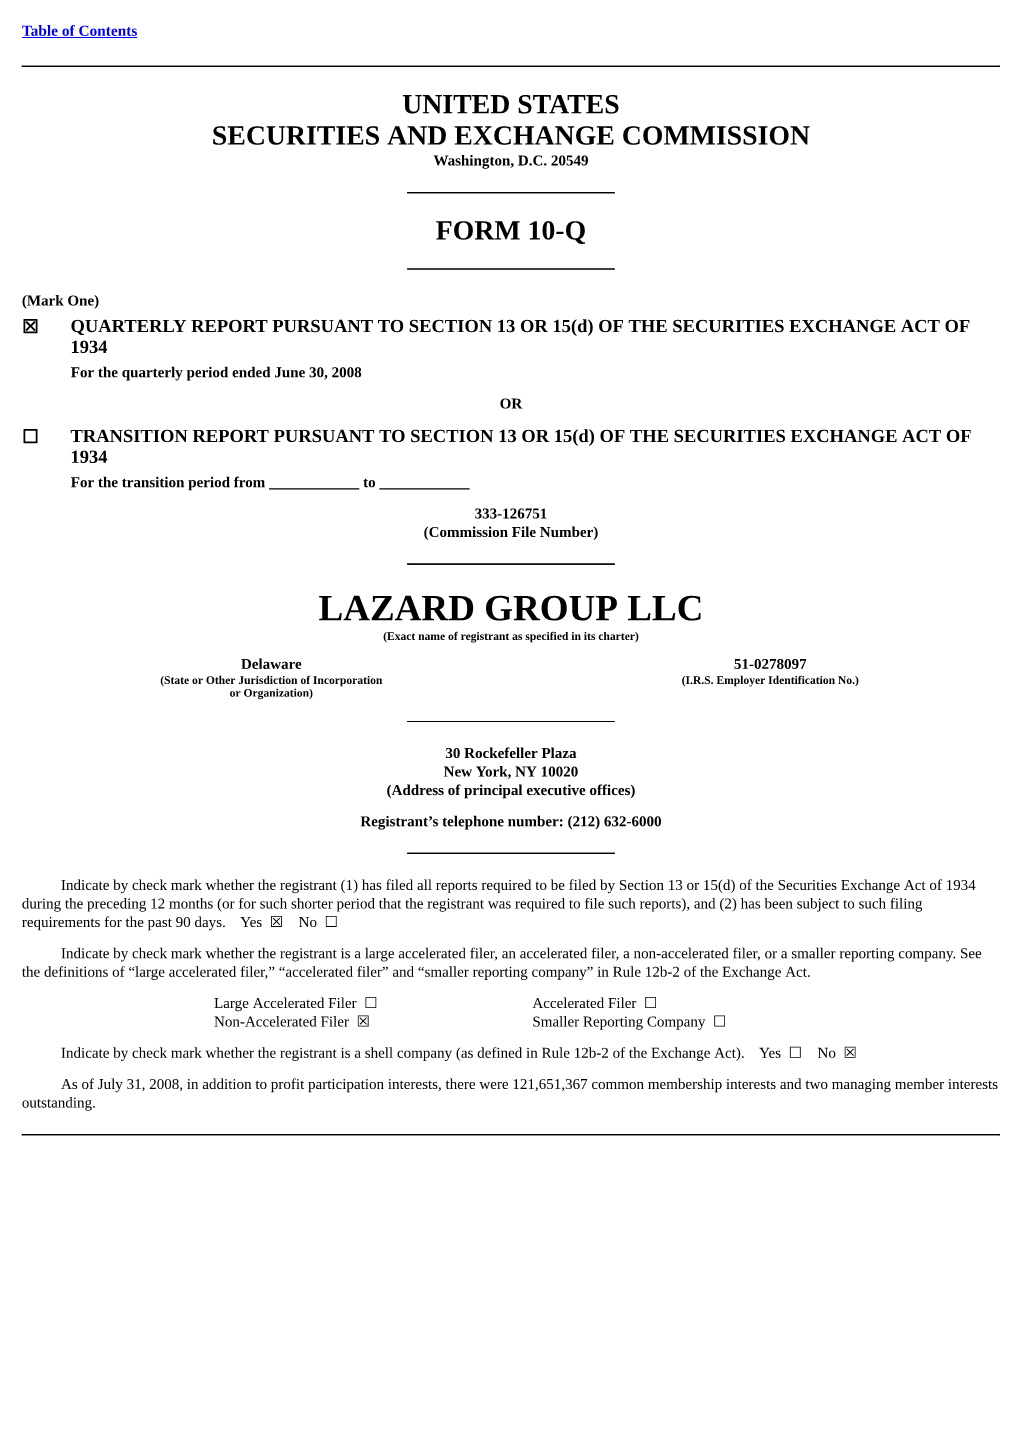 LAZARD GROUP LLC (Exact Name of Registrant As Specified in Its Charter)